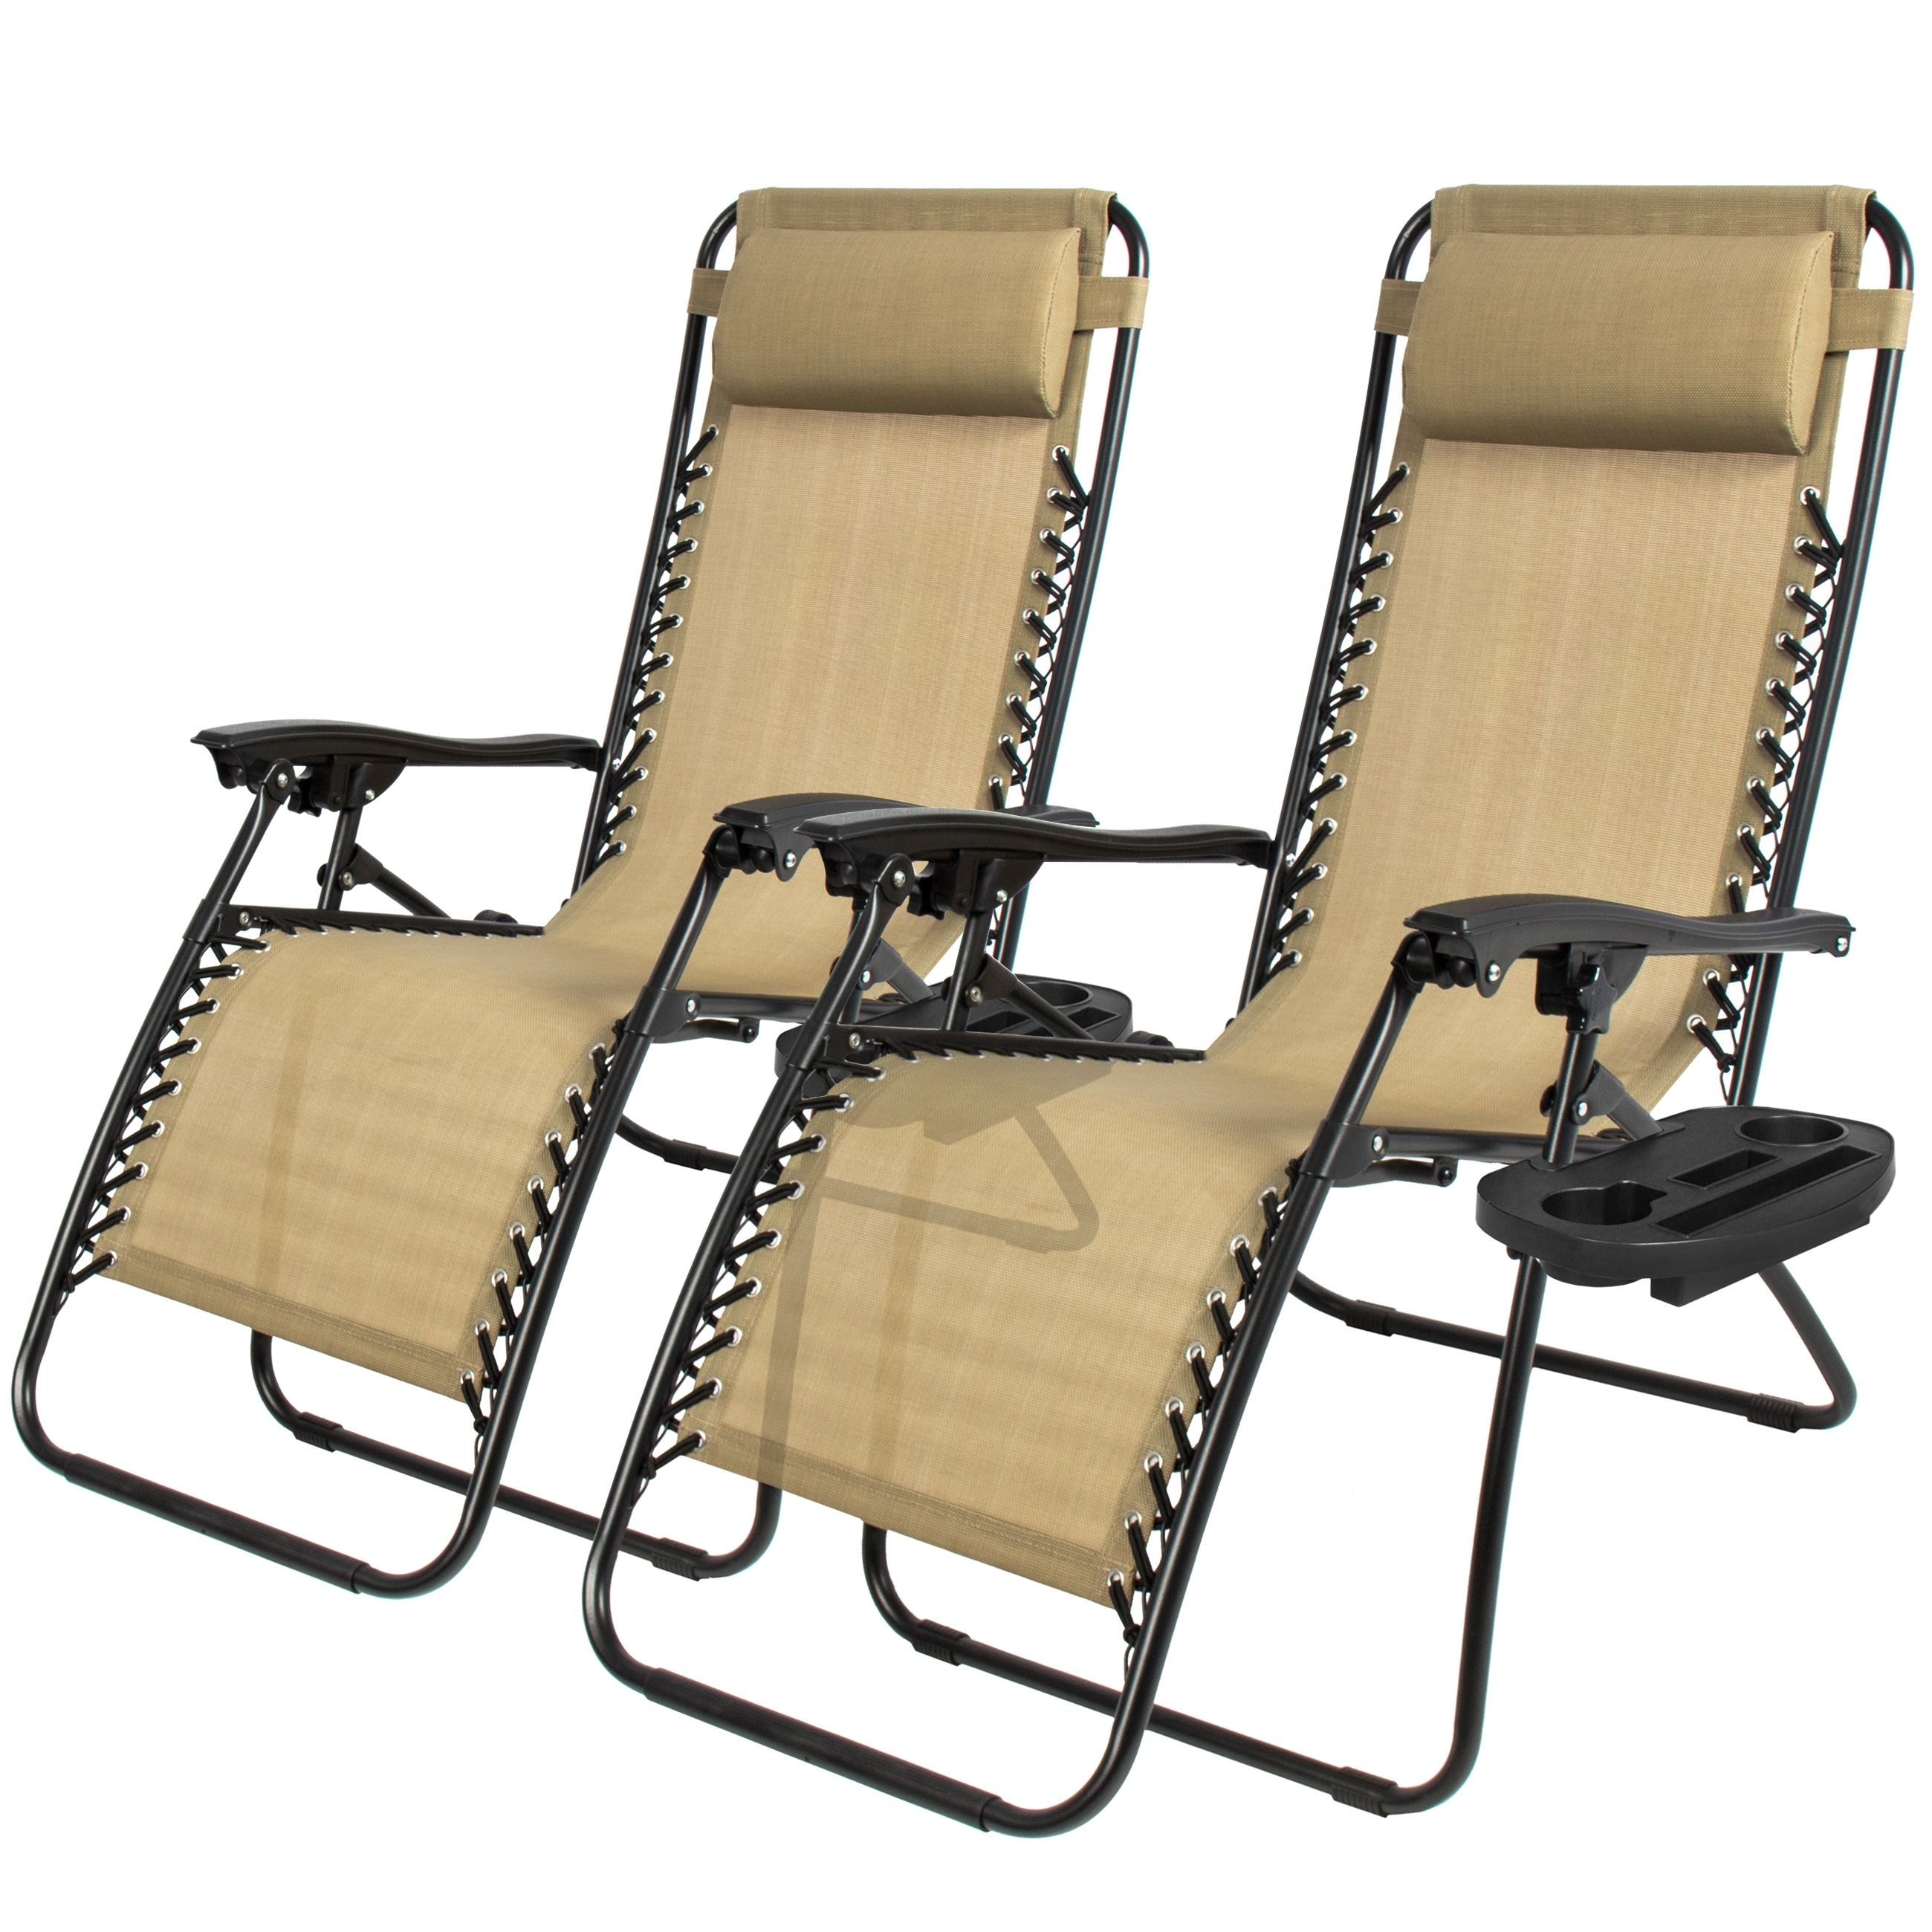 Zero Gravity Chaise Lounges Pertaining To Famous Zero Gravity Chairs Case Of (2) Lounge Patio Chairs Outdoor Yard (View 13 of 15)